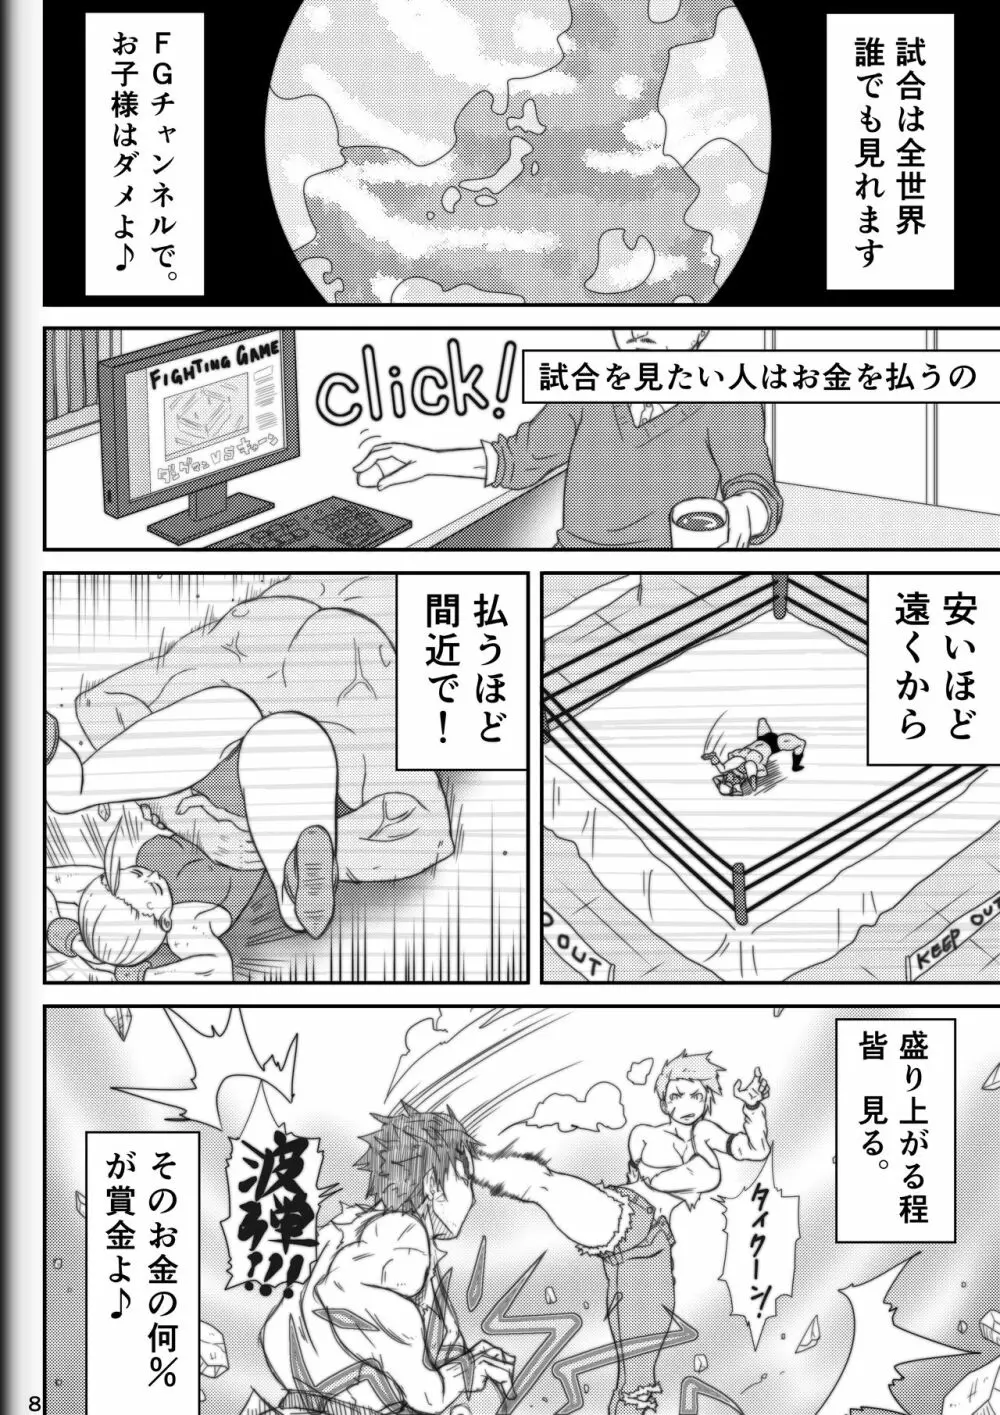 Fighting Game New 2 - page10